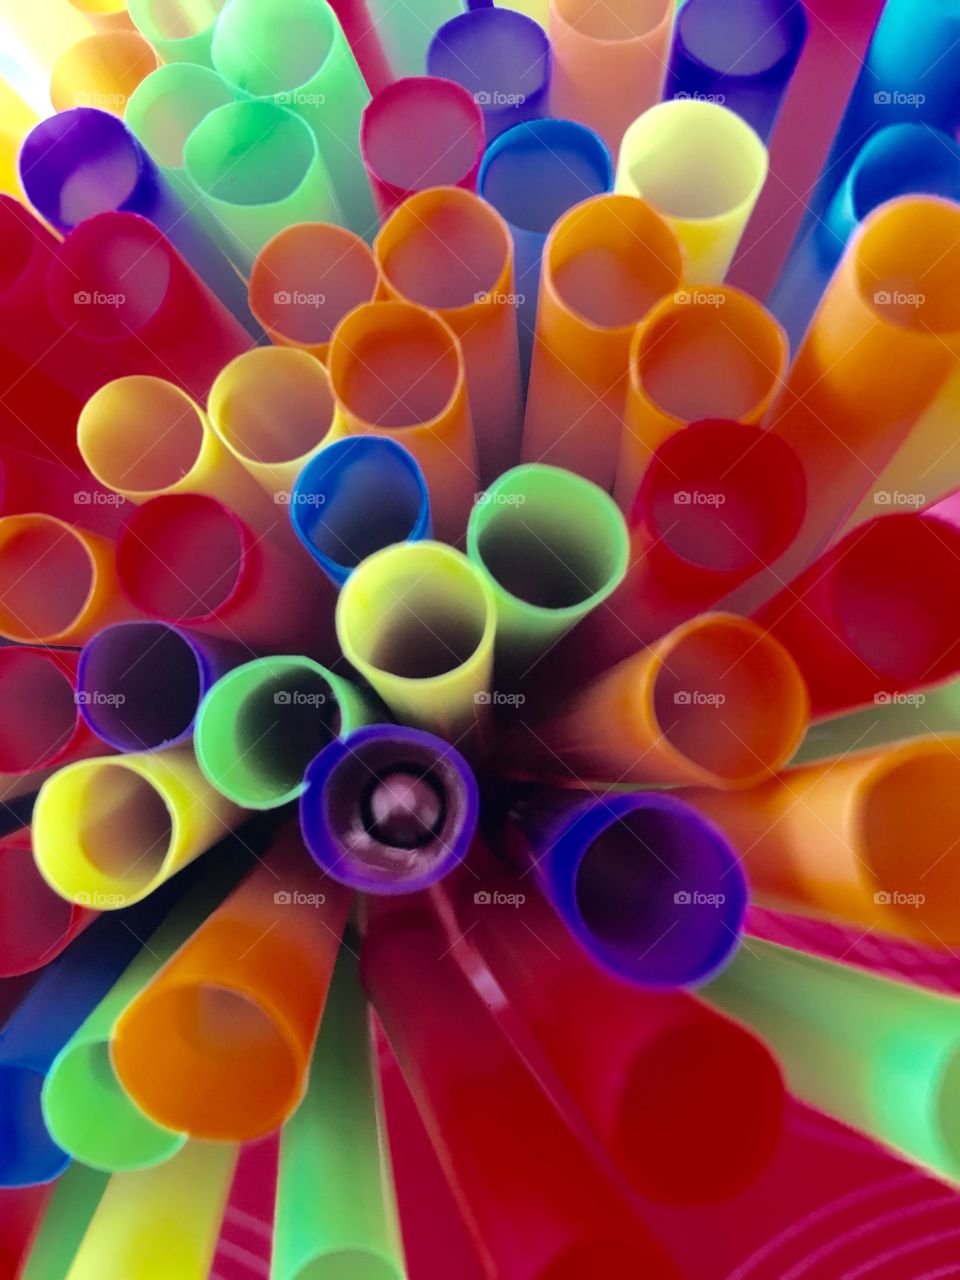 Abstract colorful bundle of drinking straws 